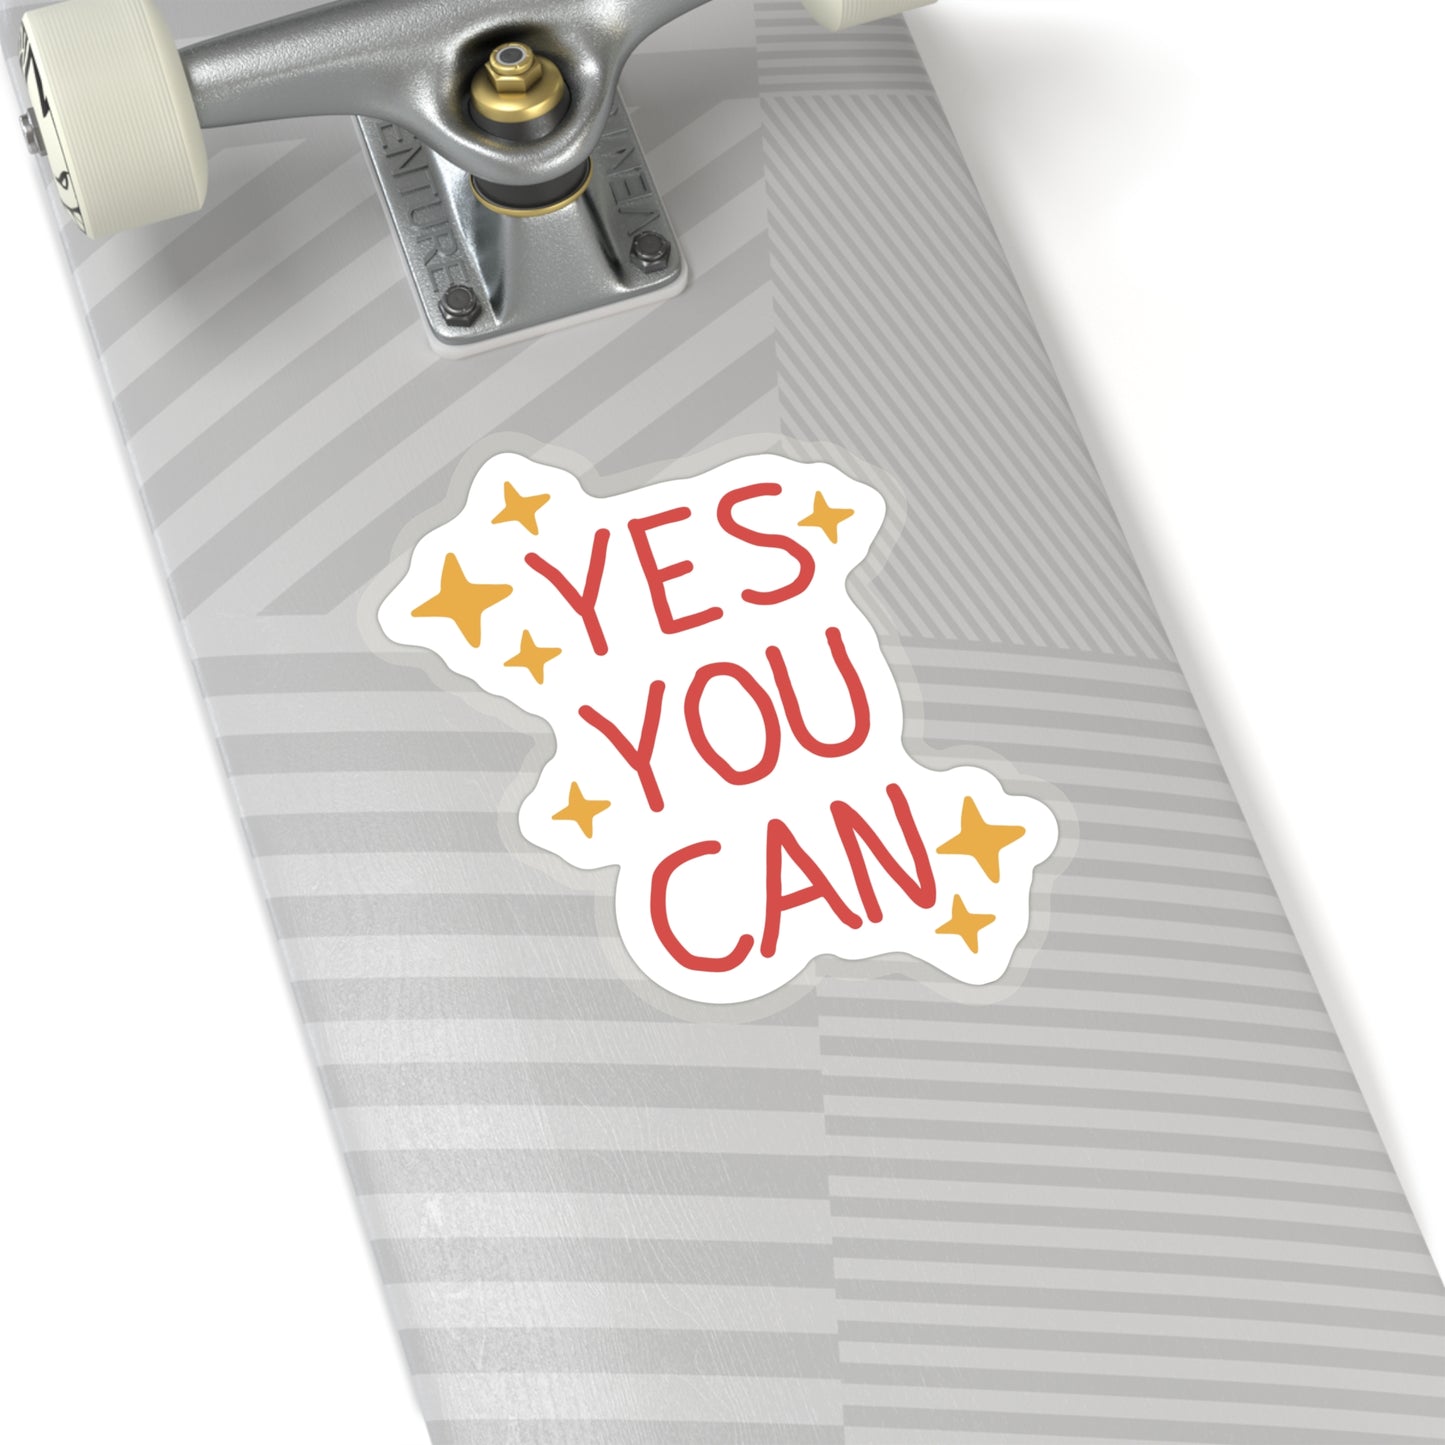 Yes You Can Sticker Bright Colors | Fun Stickers | Happy Stickers | Must Have Stickers | Laptop Stickers | Best Stickers | Gift Ideas